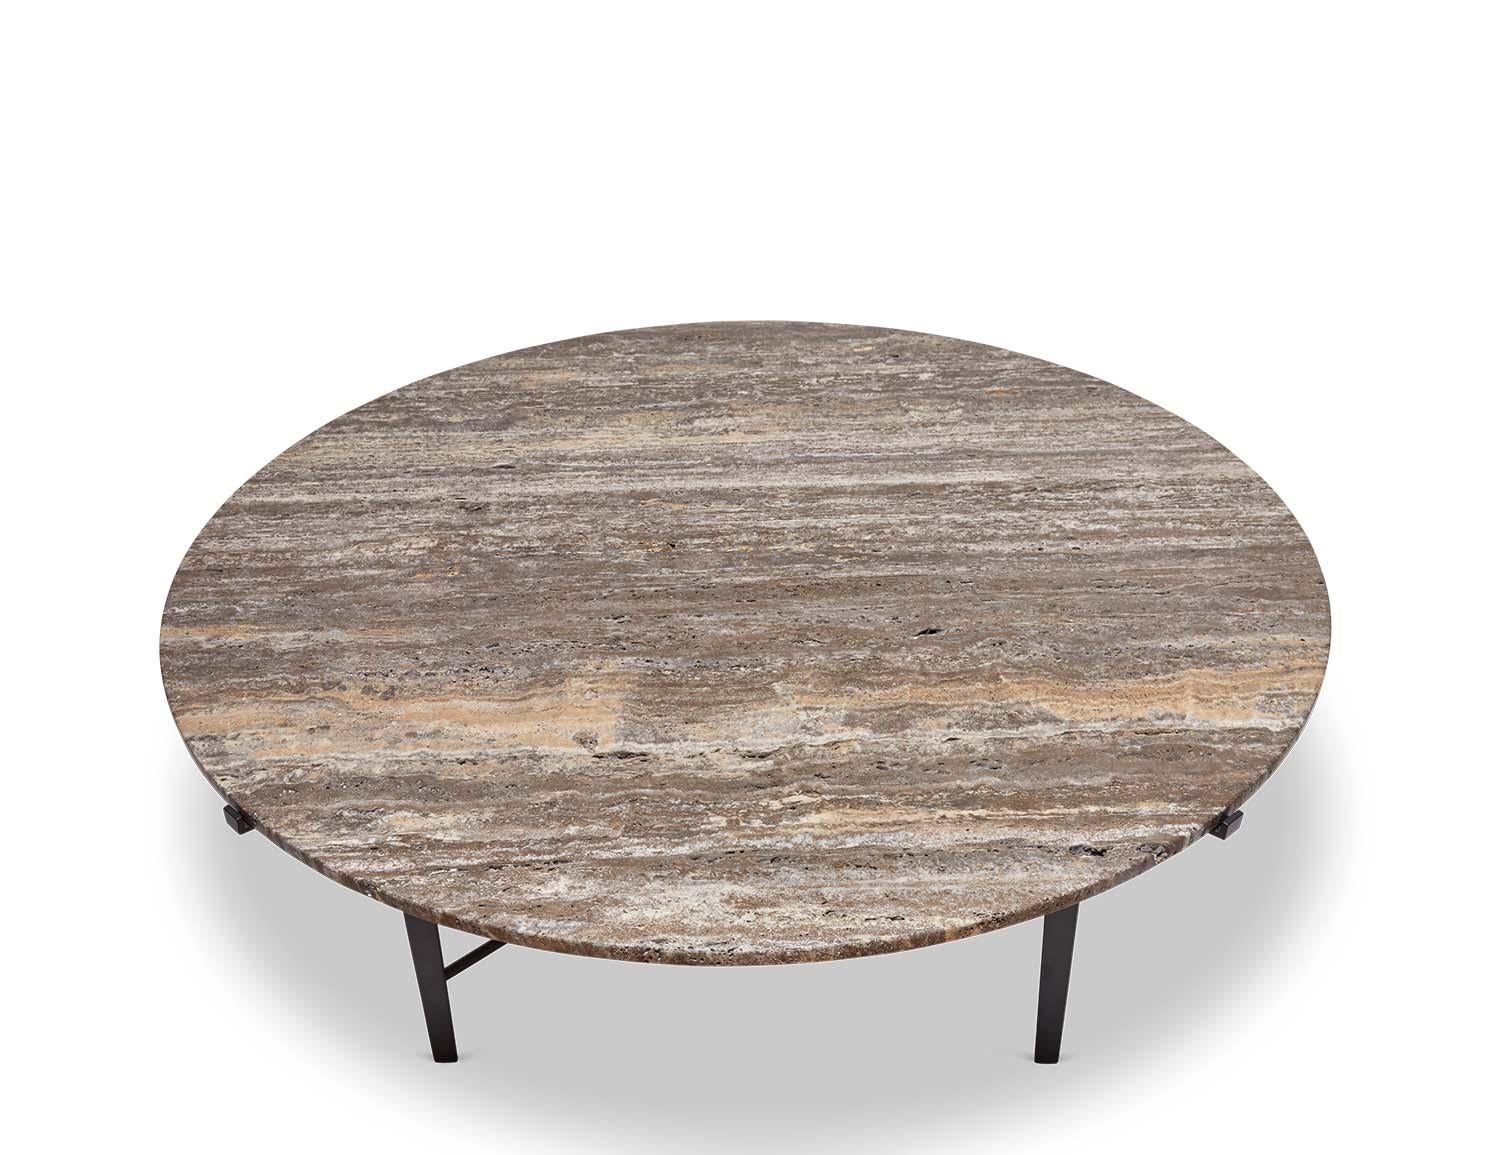 American Indoor/Outdoor Montrose Coffee Table, Round by Lawson-Fenning